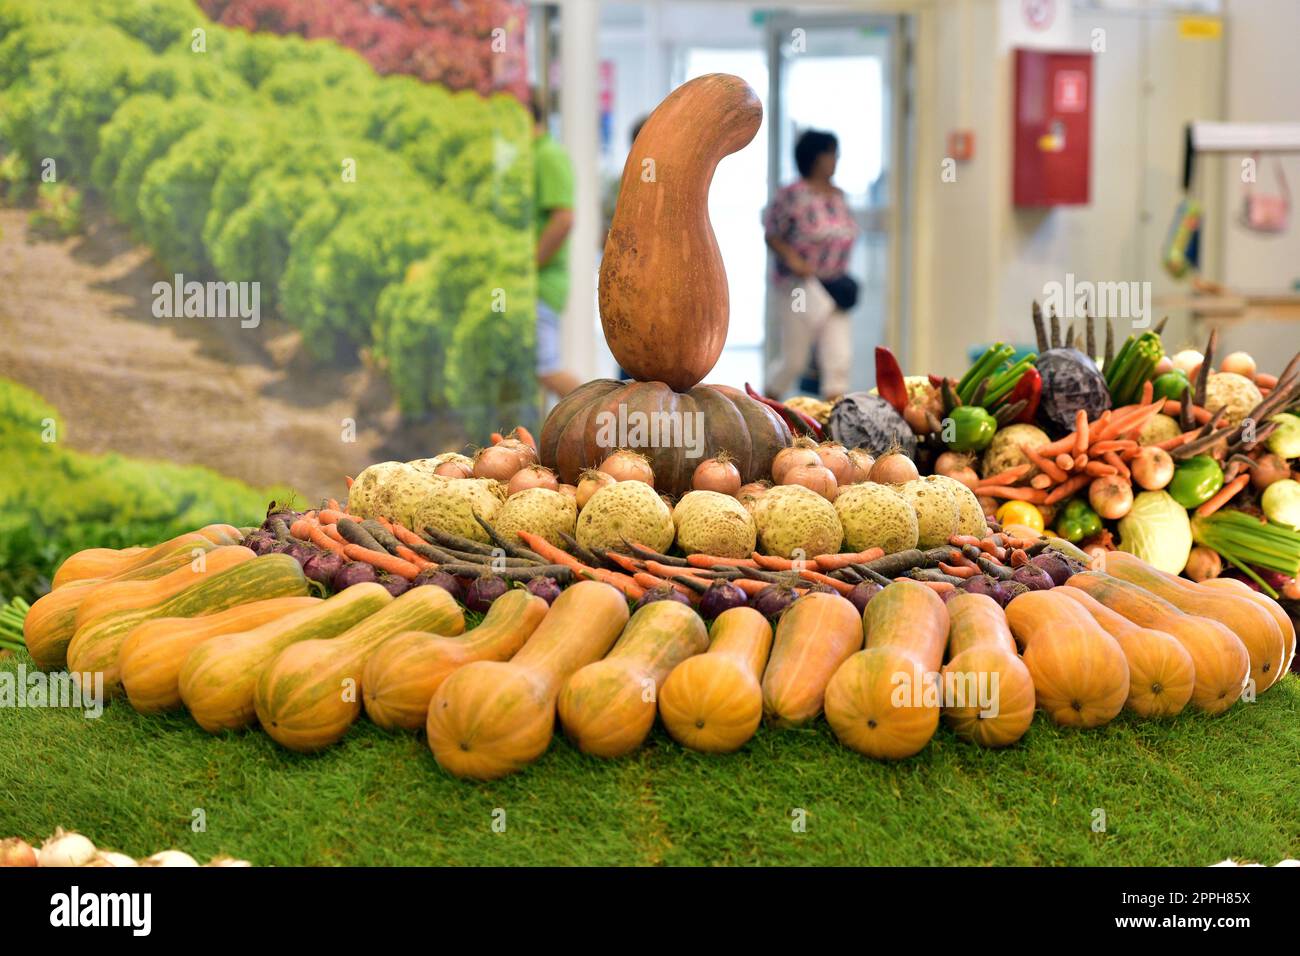 Decoration with different types of vegetables Stock Photo